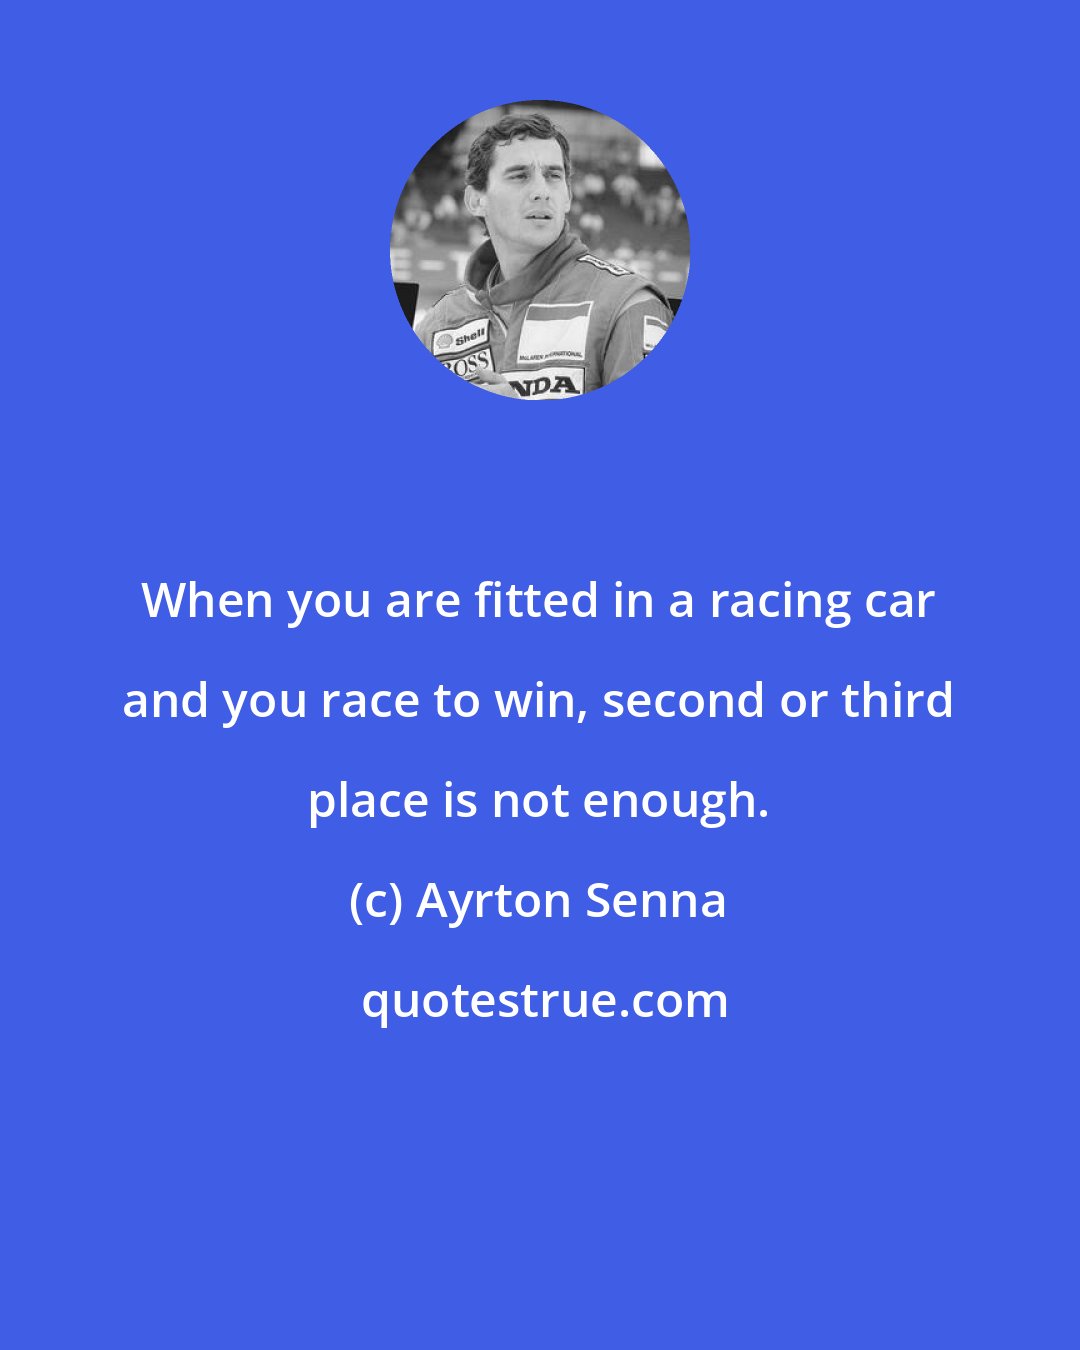 Ayrton Senna: When you are fitted in a racing car and you race to win, second or third place is not enough.